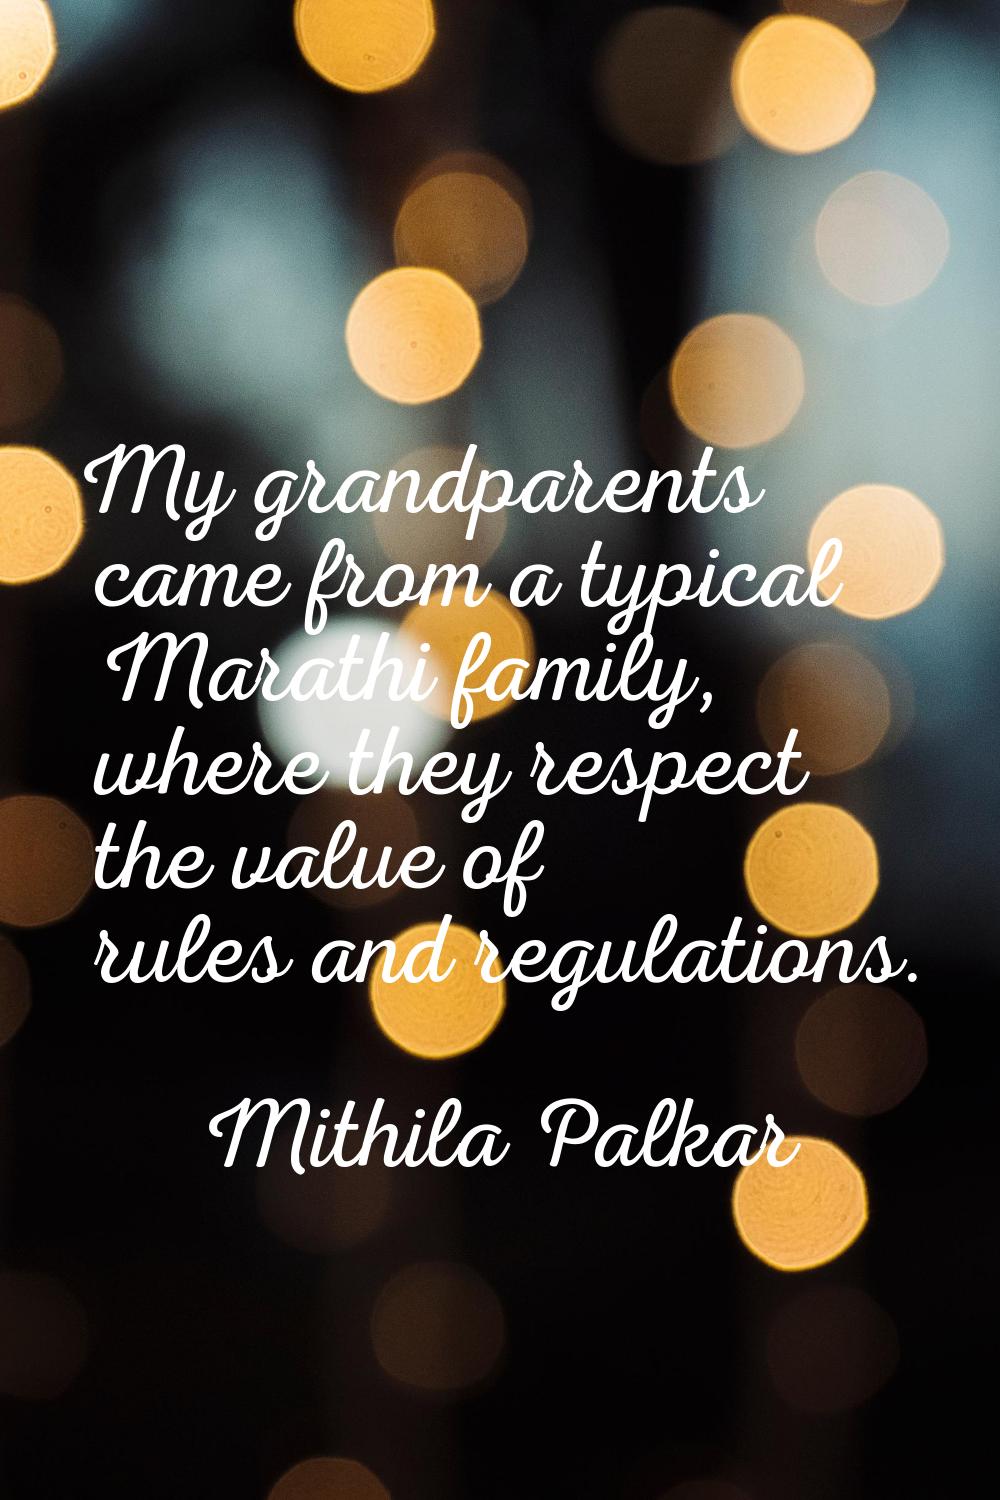 My grandparents came from a typical Marathi family, where they respect the value of rules and regul